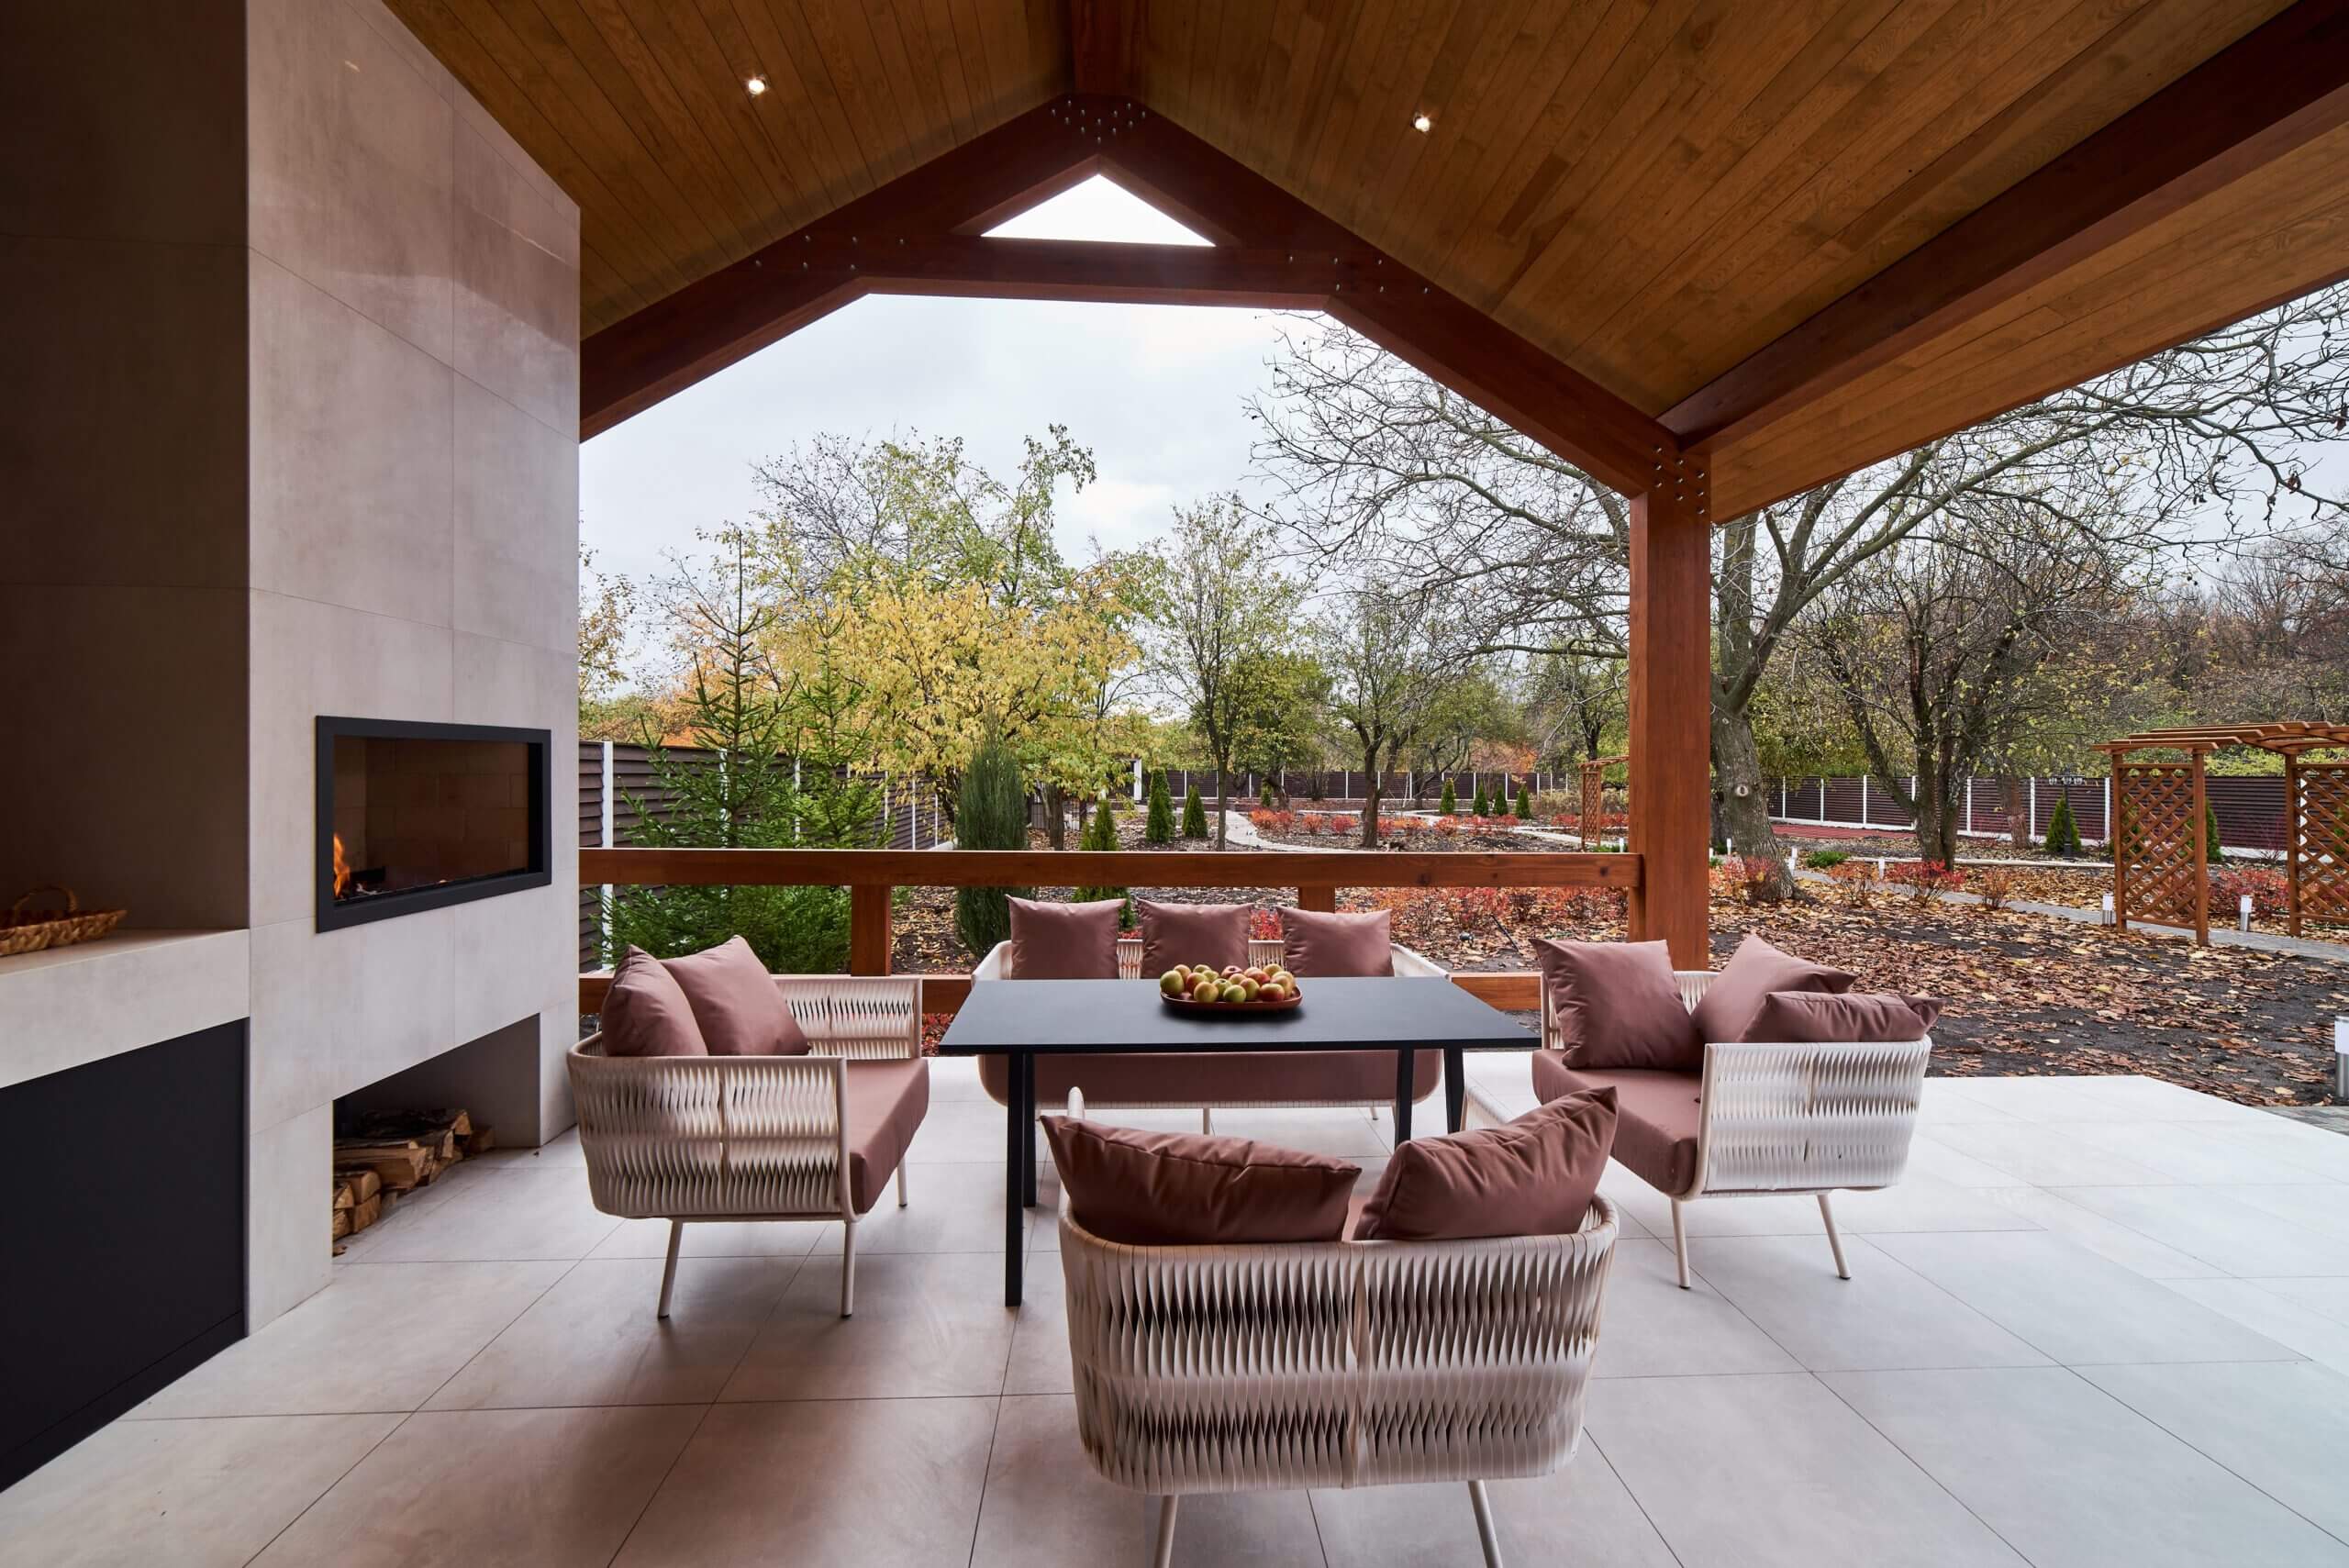 Stylish outdoor living space with comfortable seating and a modern fireplace, surrounded by lush greenery.